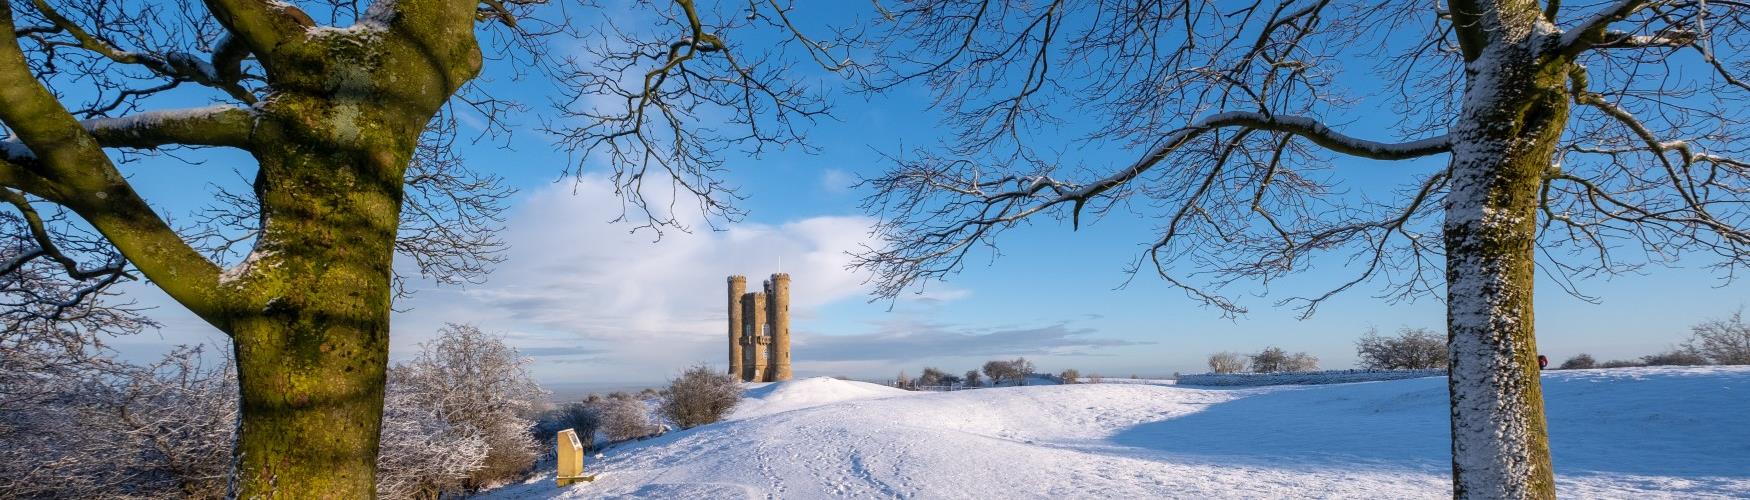 Broadway Tower in the snow